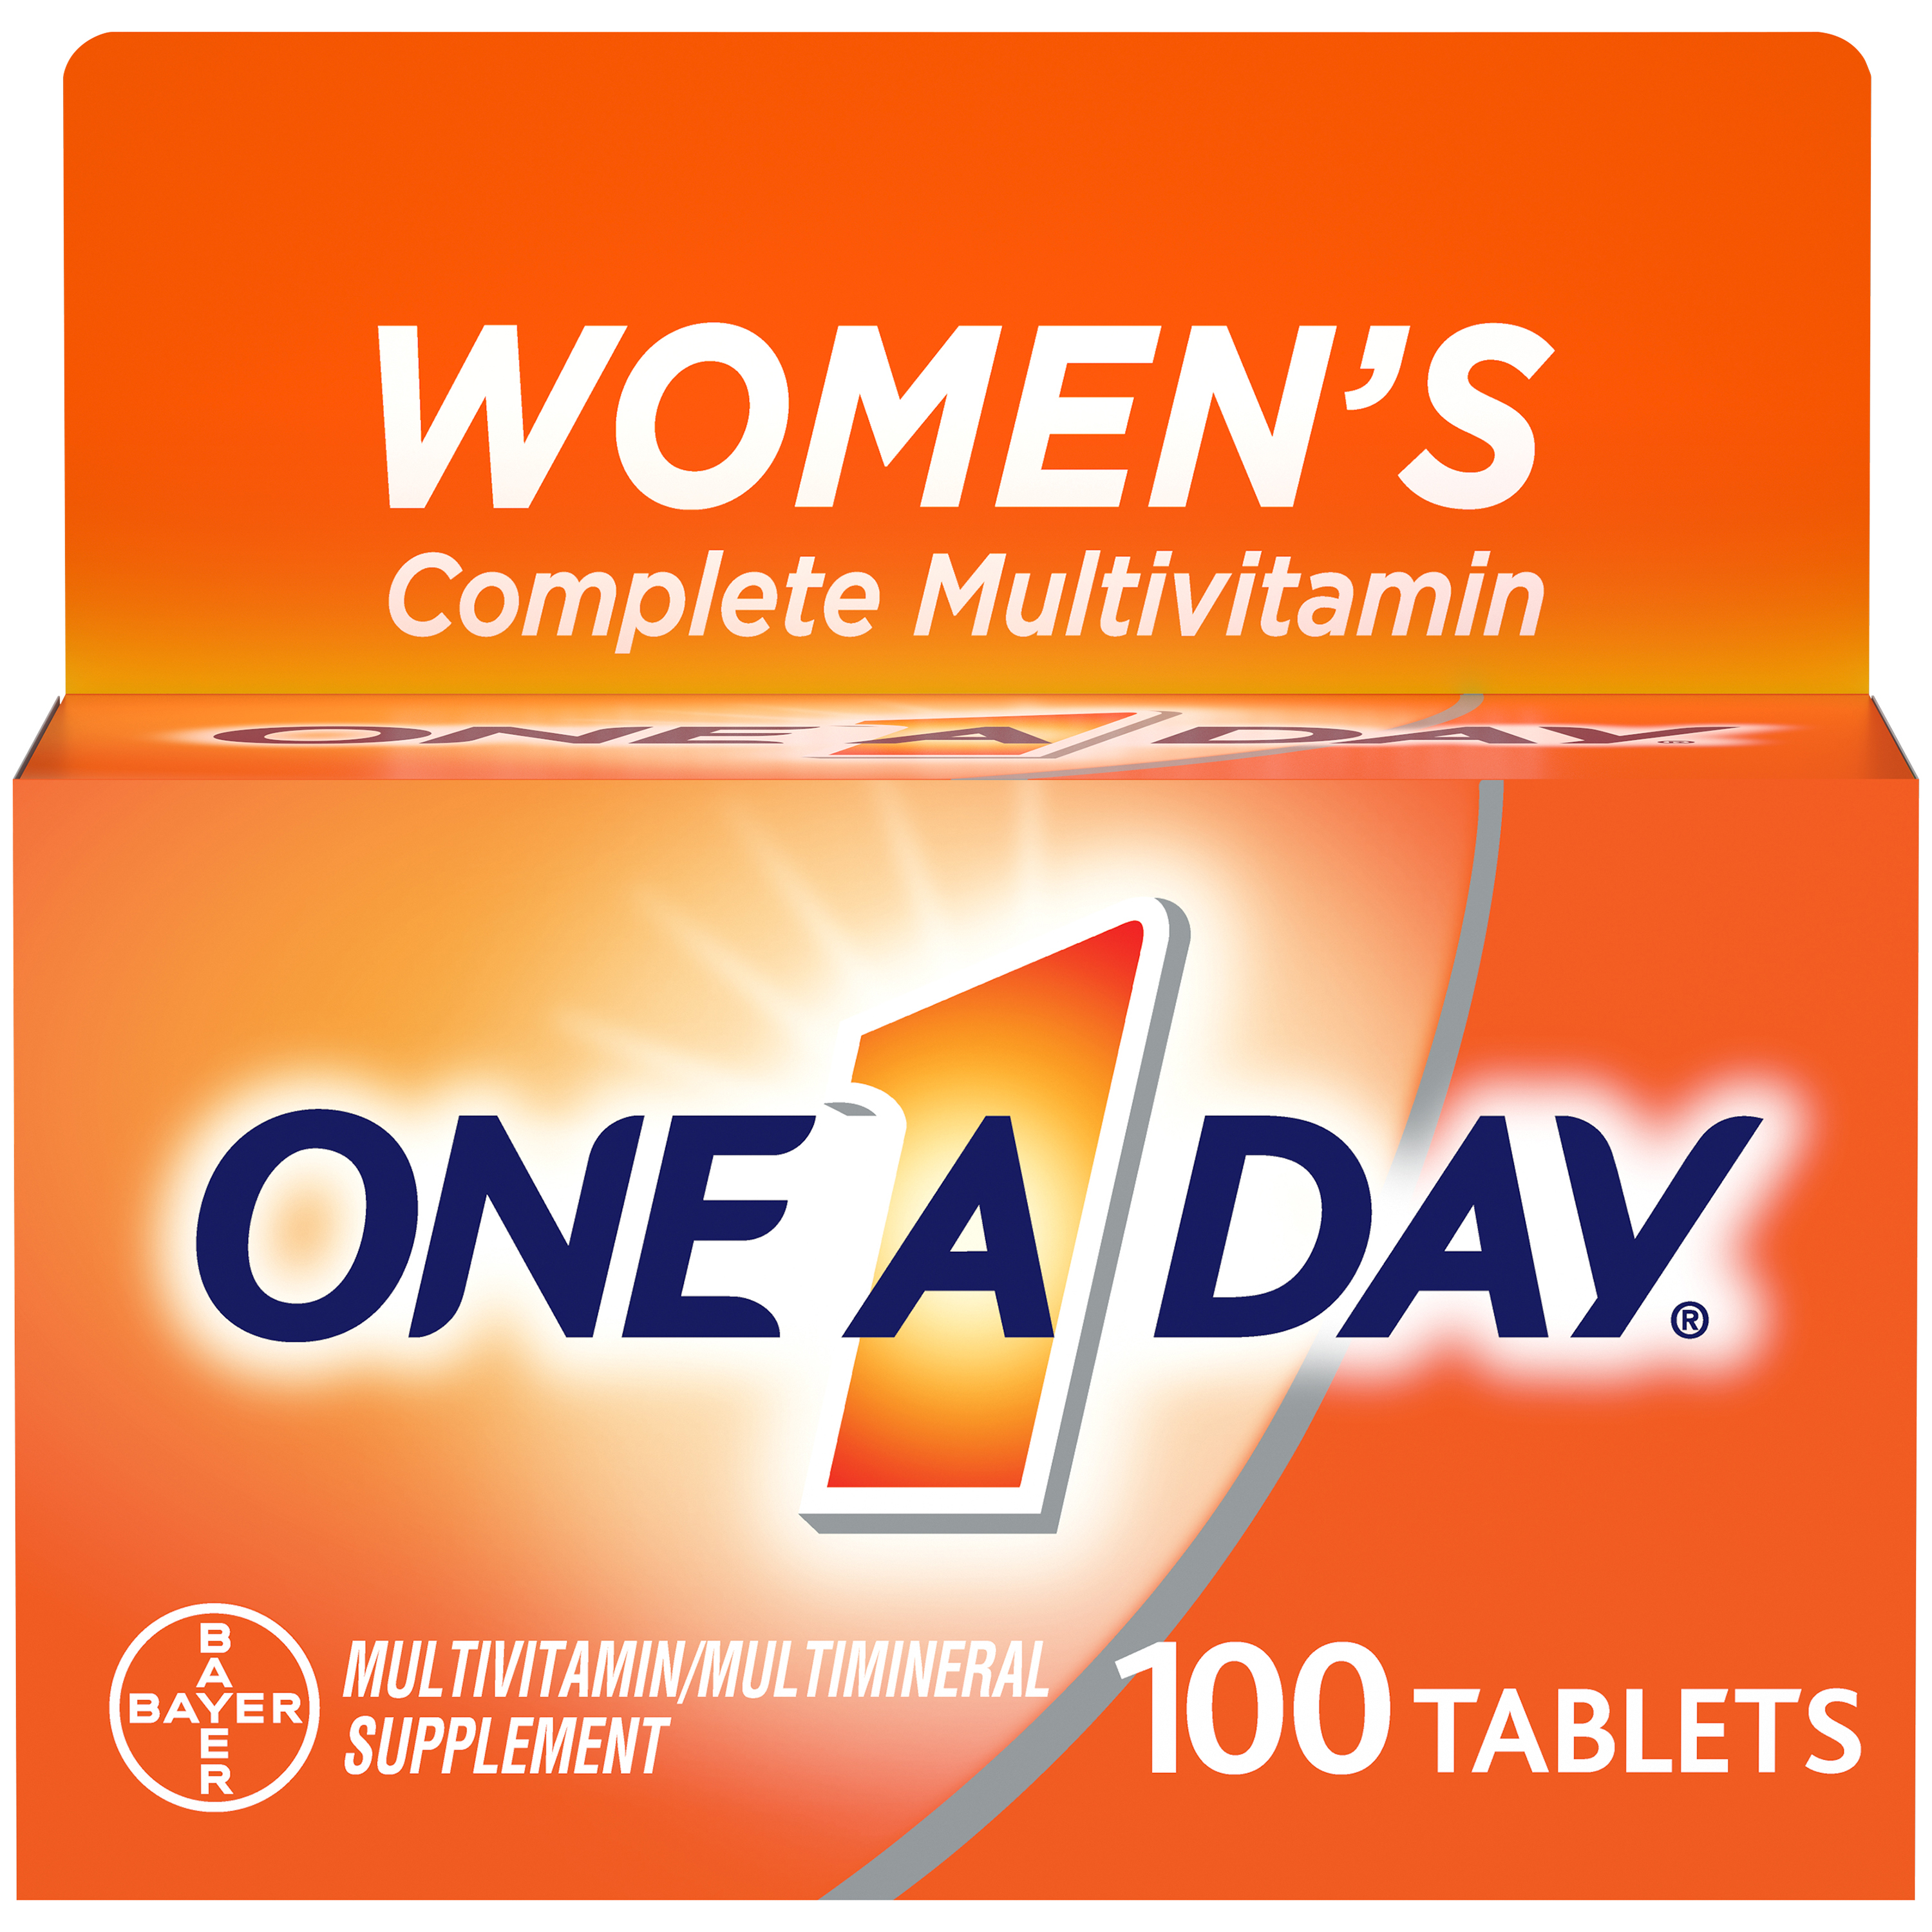 One A Day Women's Multivitamin Tablets, Multivitamins for Women, 100 Ct - image 1 of 22